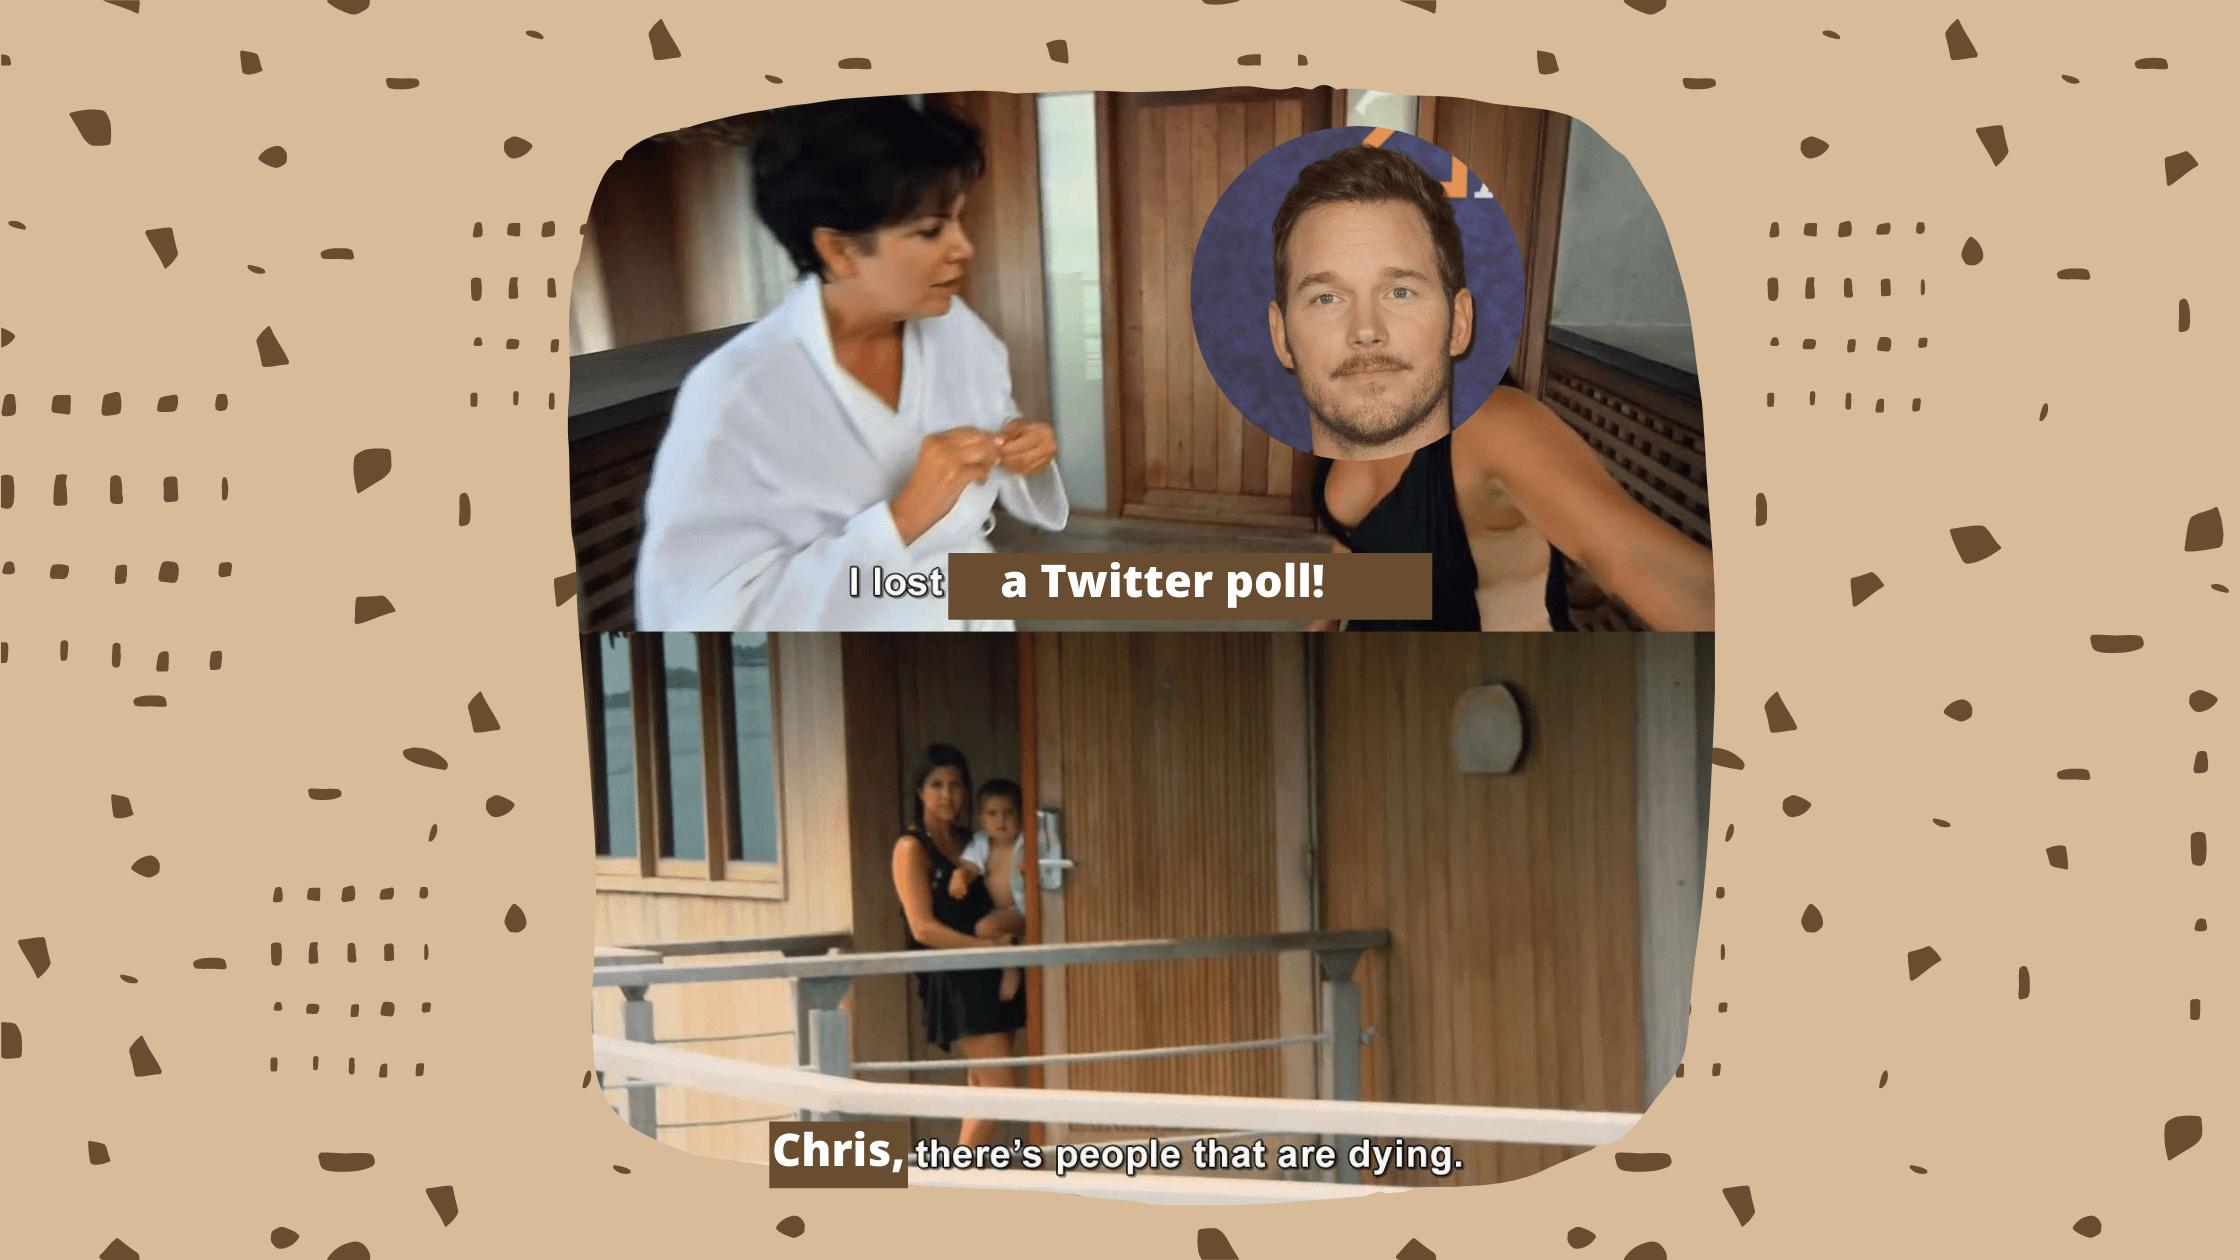 A picture of Chris Pratt photoshopped onto a scene of "Keeping Up With The Kardashians," where Kourtney says, "Kim, there's people that are dying!"